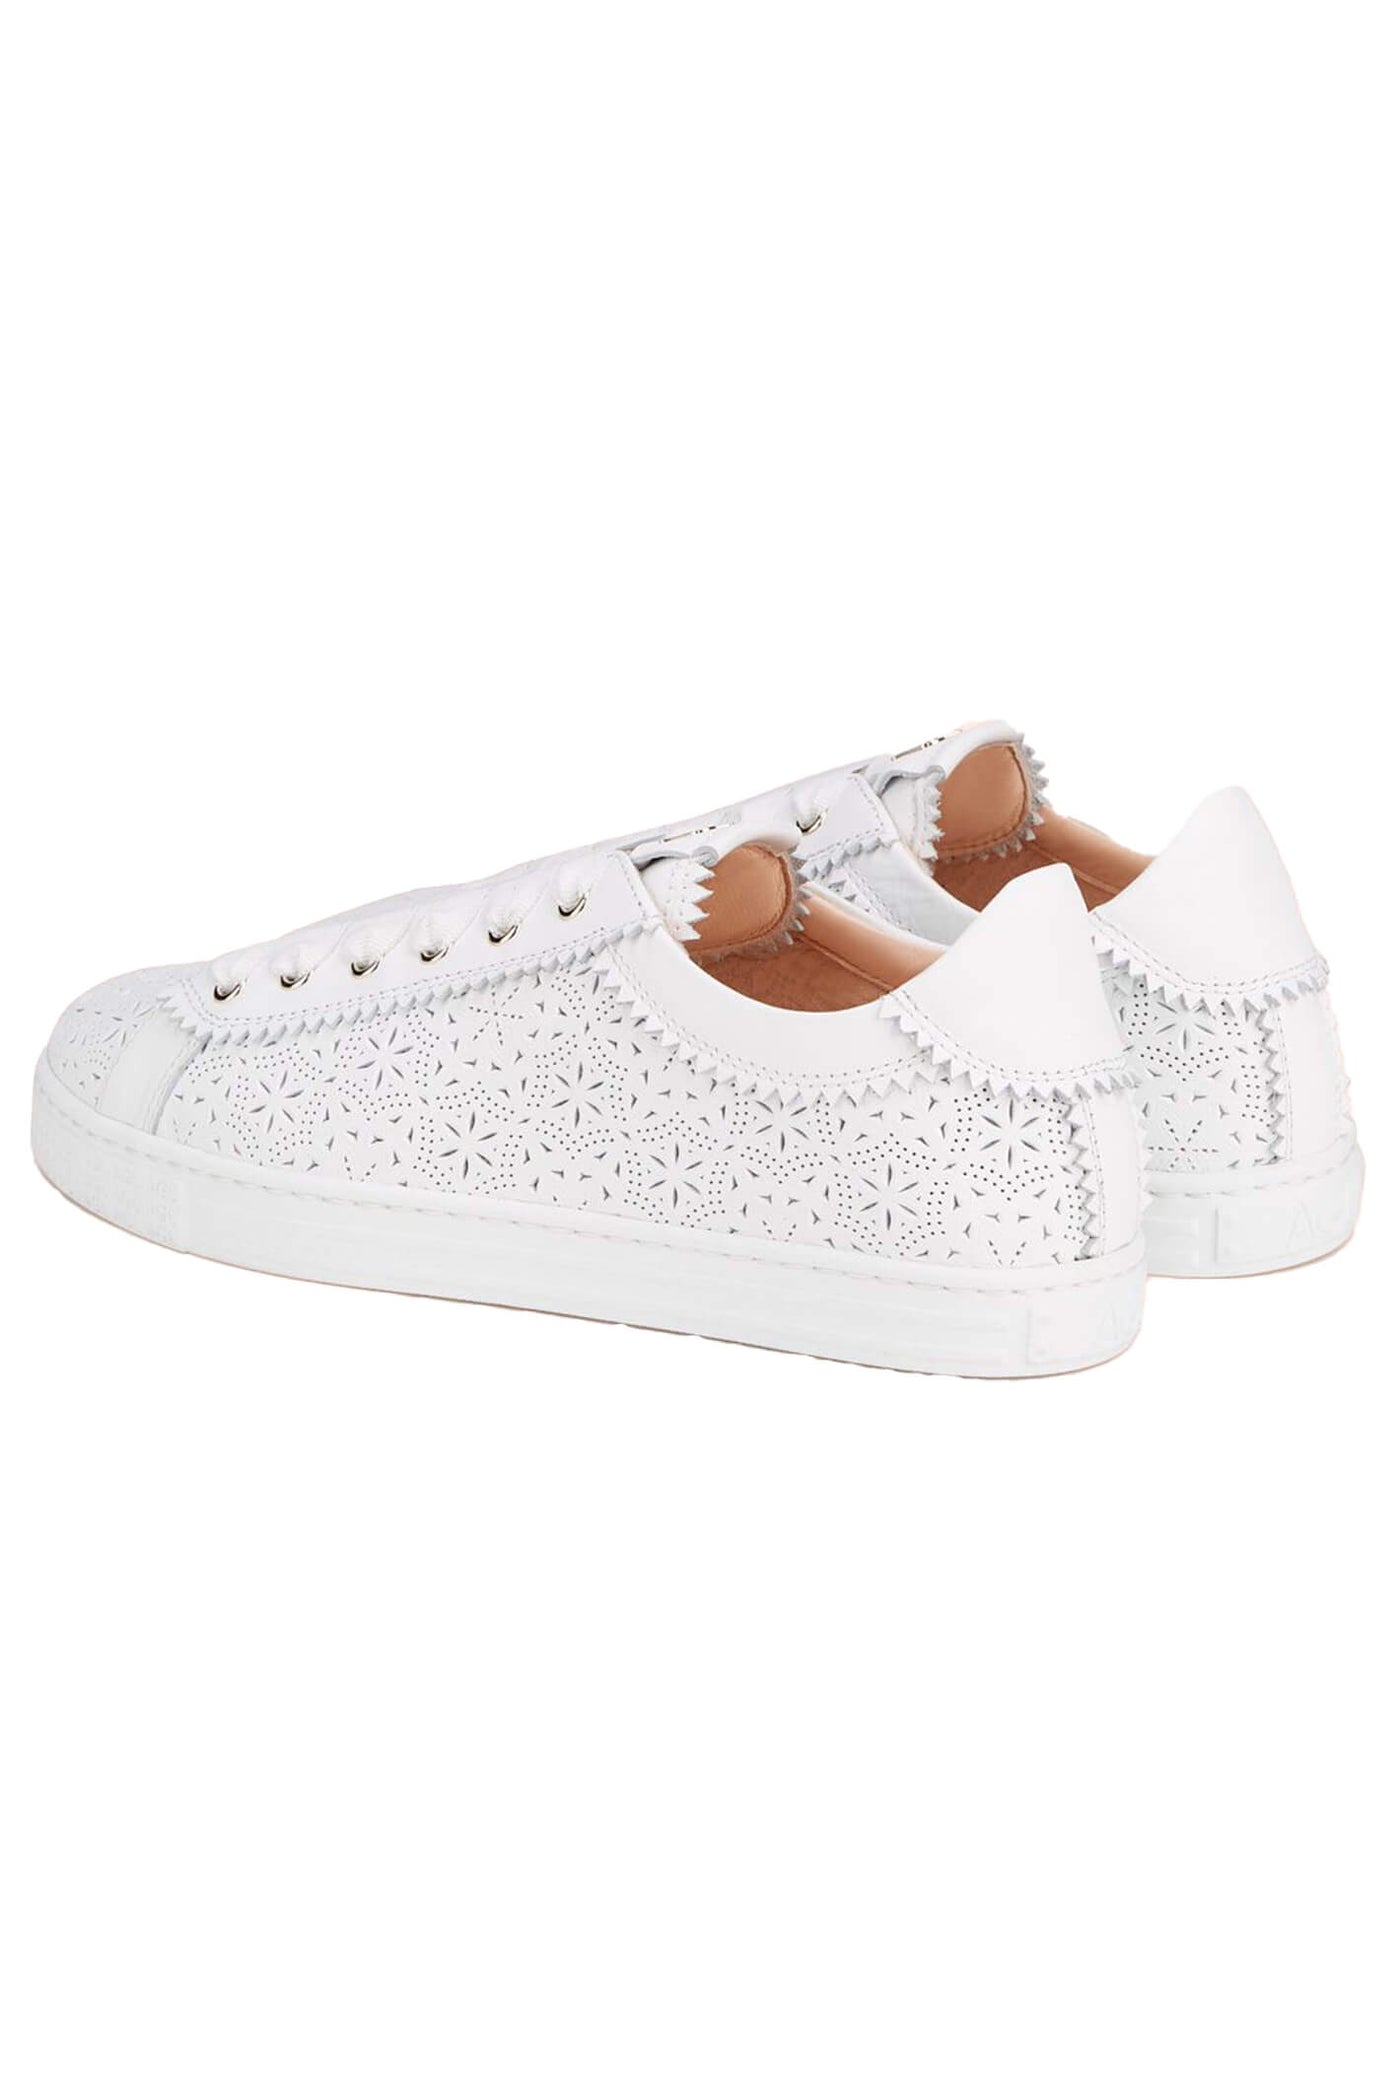 AGL Sade Spring White Perforated Sneakers - Lonah Boutique